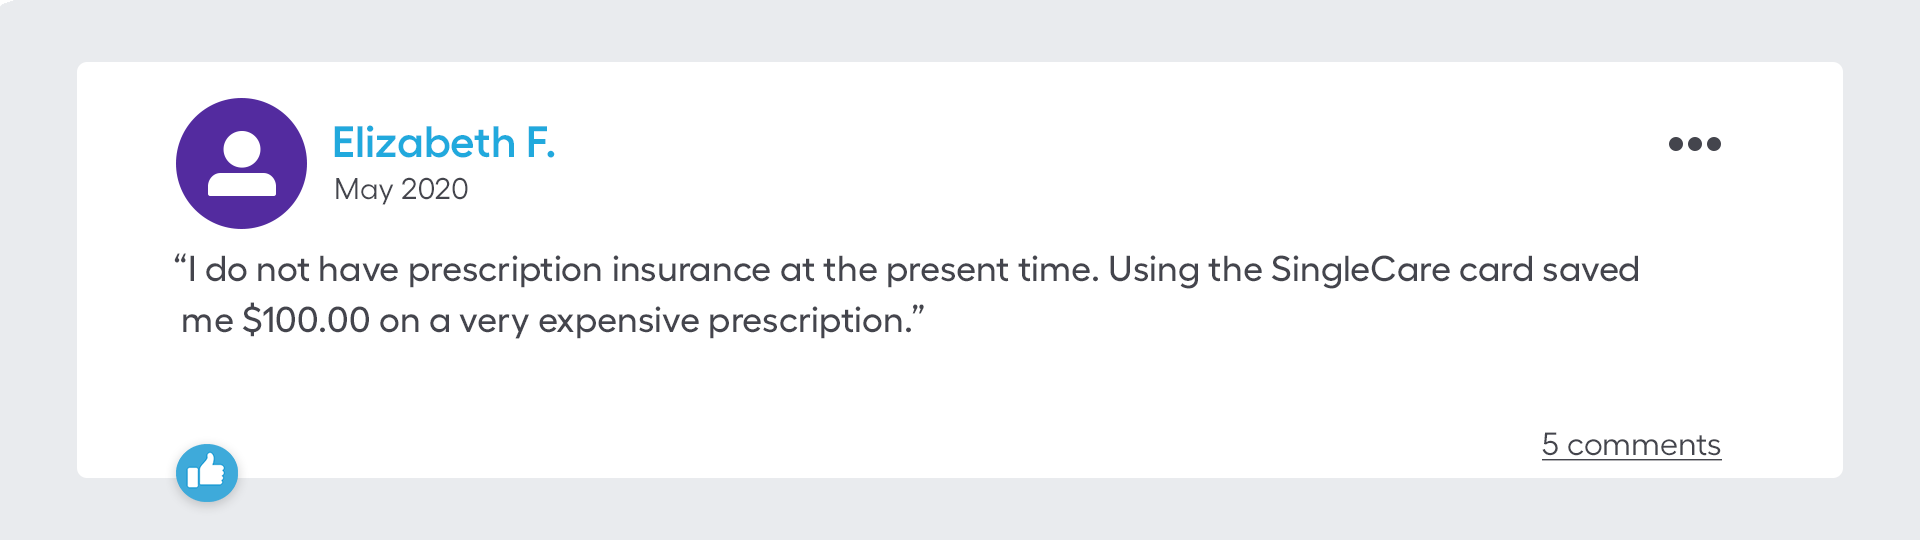 I do not have prescription insurance at the present time. Using the SingleCare card saved me $100 on a very expensive prescription.